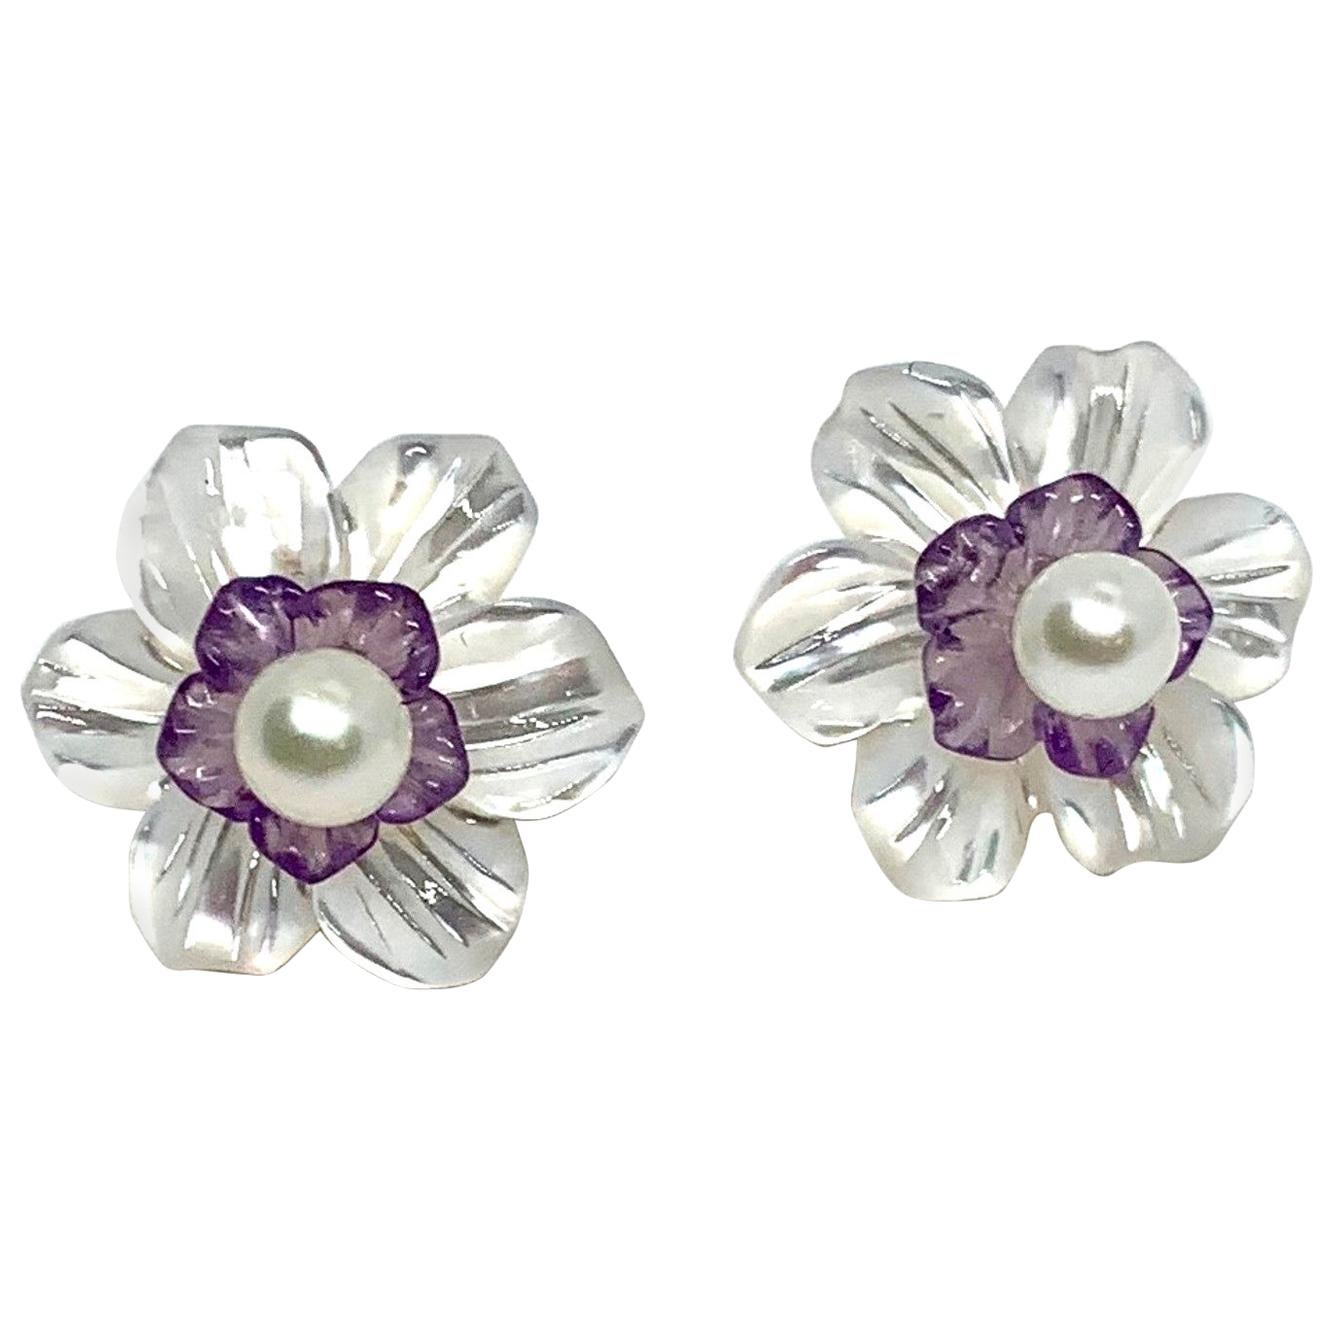 Carved Amethyst, Mother-of-Pearl 18k Floral Earring Jackets w/ White Pearl Posts